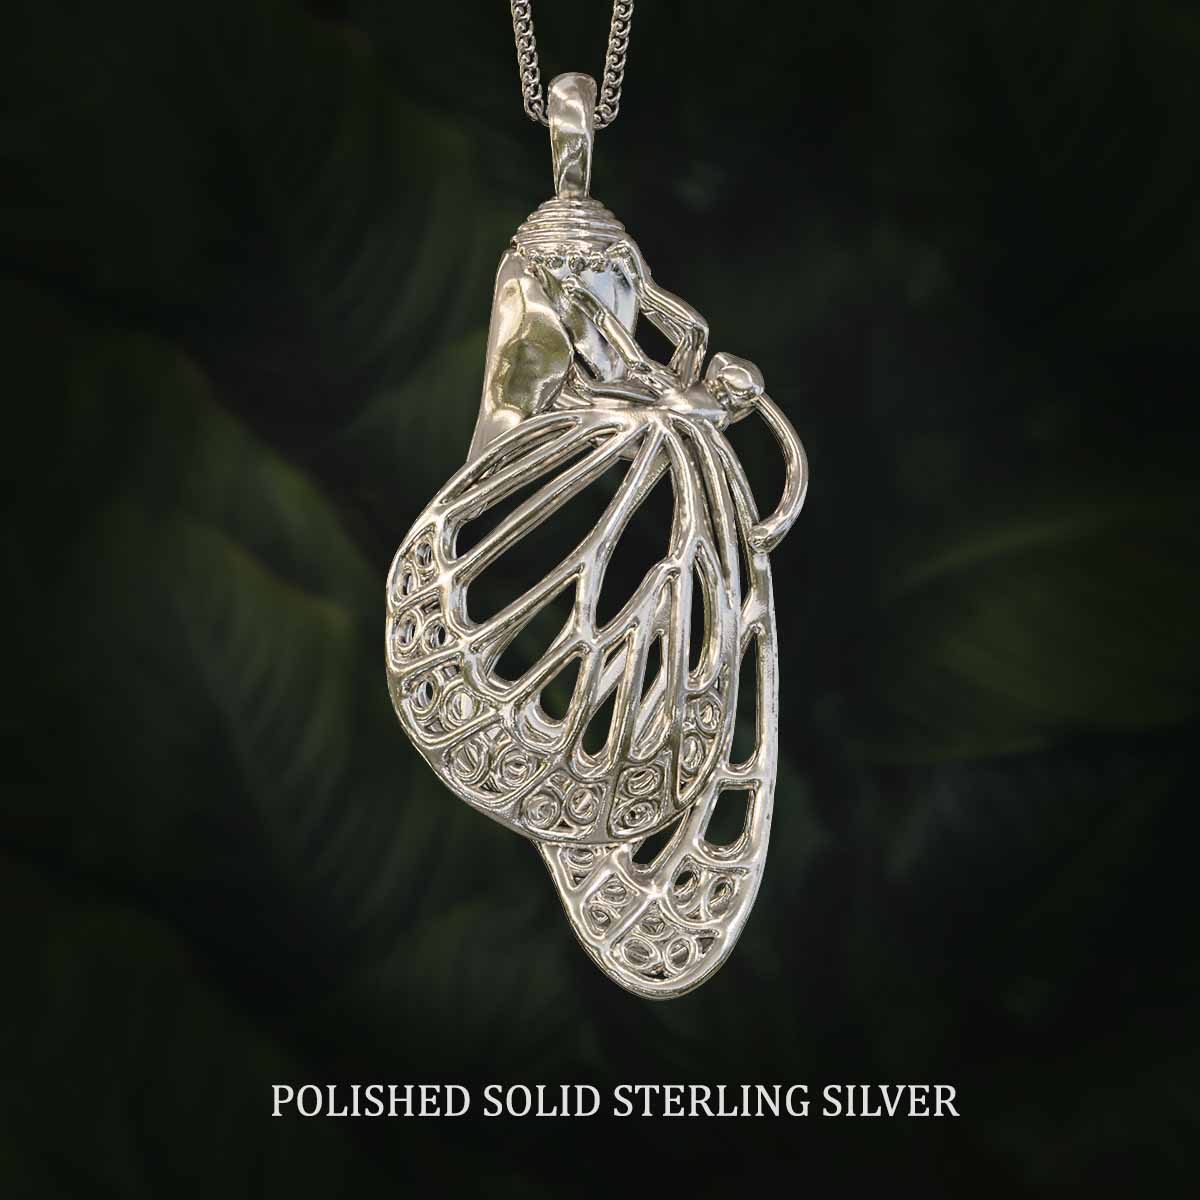 Polished-Solid-Sterling-Silver-Monarch-Chrysalis-Pendant-Jewelry-For-Necklace